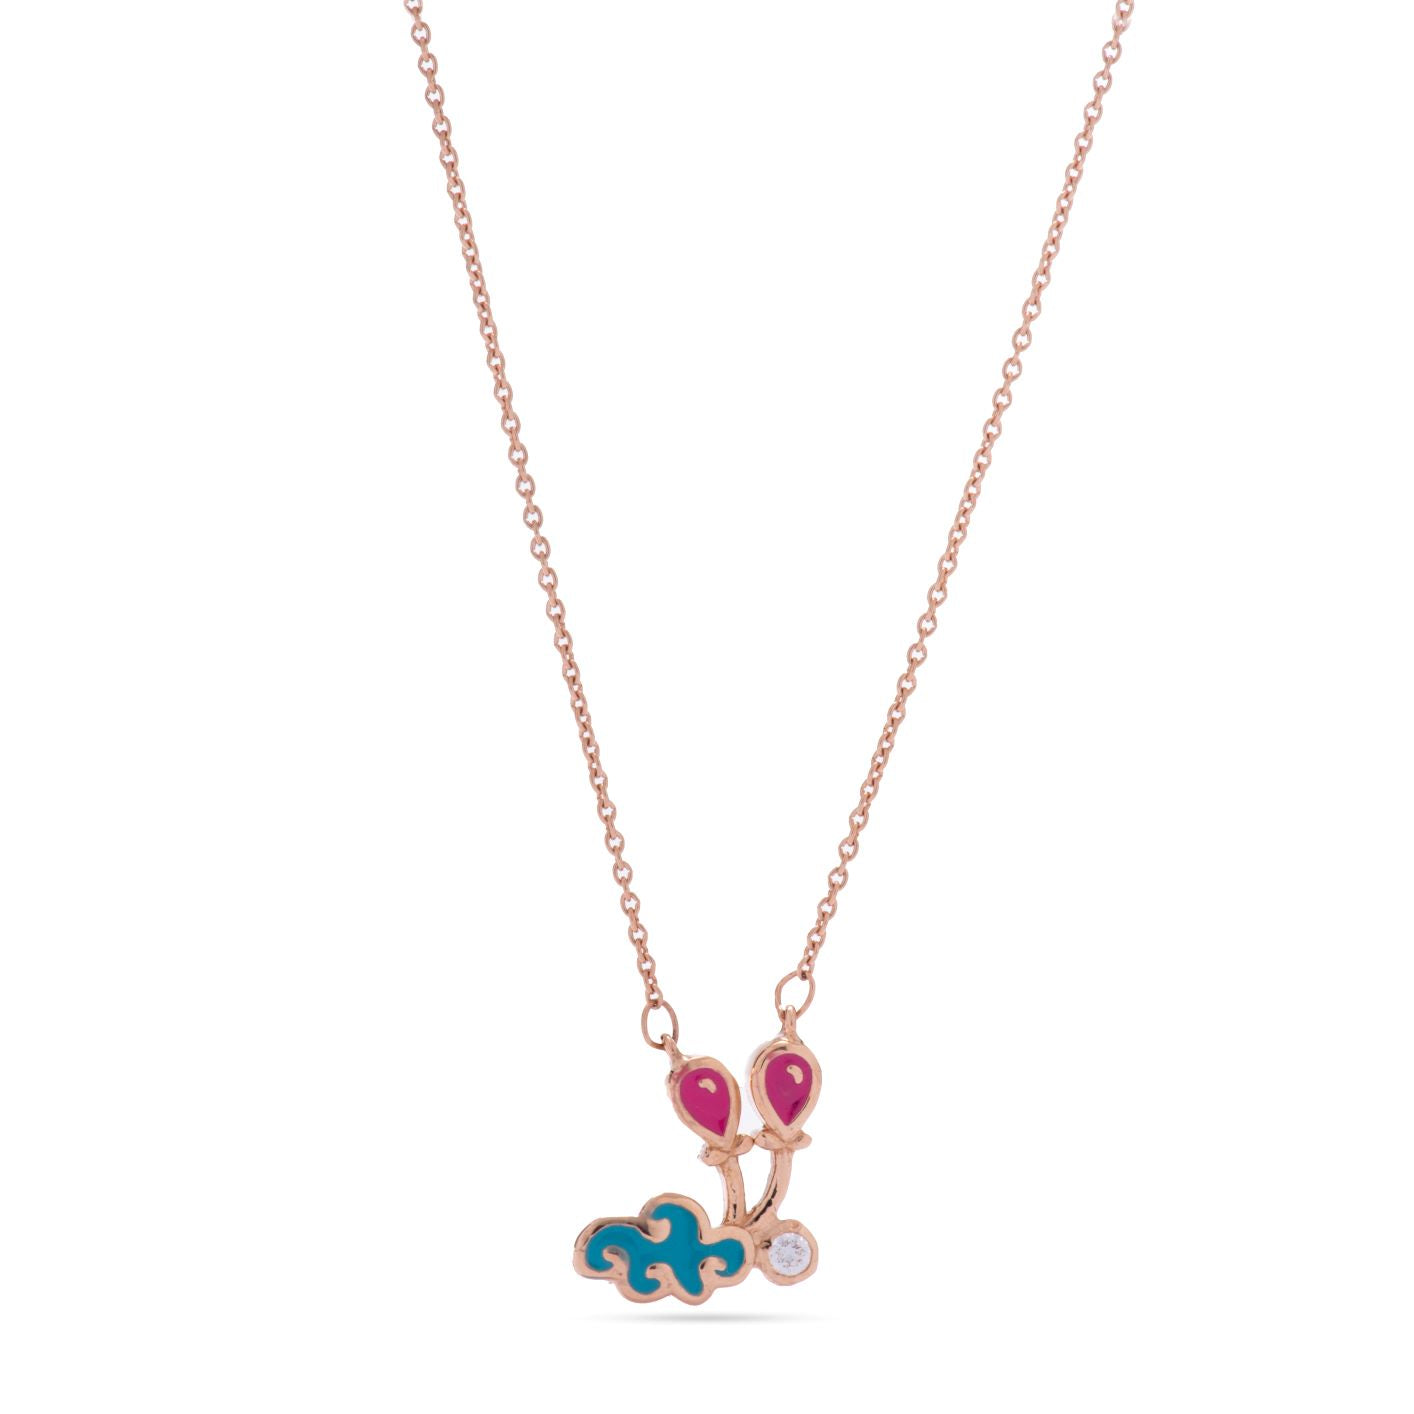 Kid's Delightful Bee Shaped Necklace in Yellow 18 K Gold - NB0841